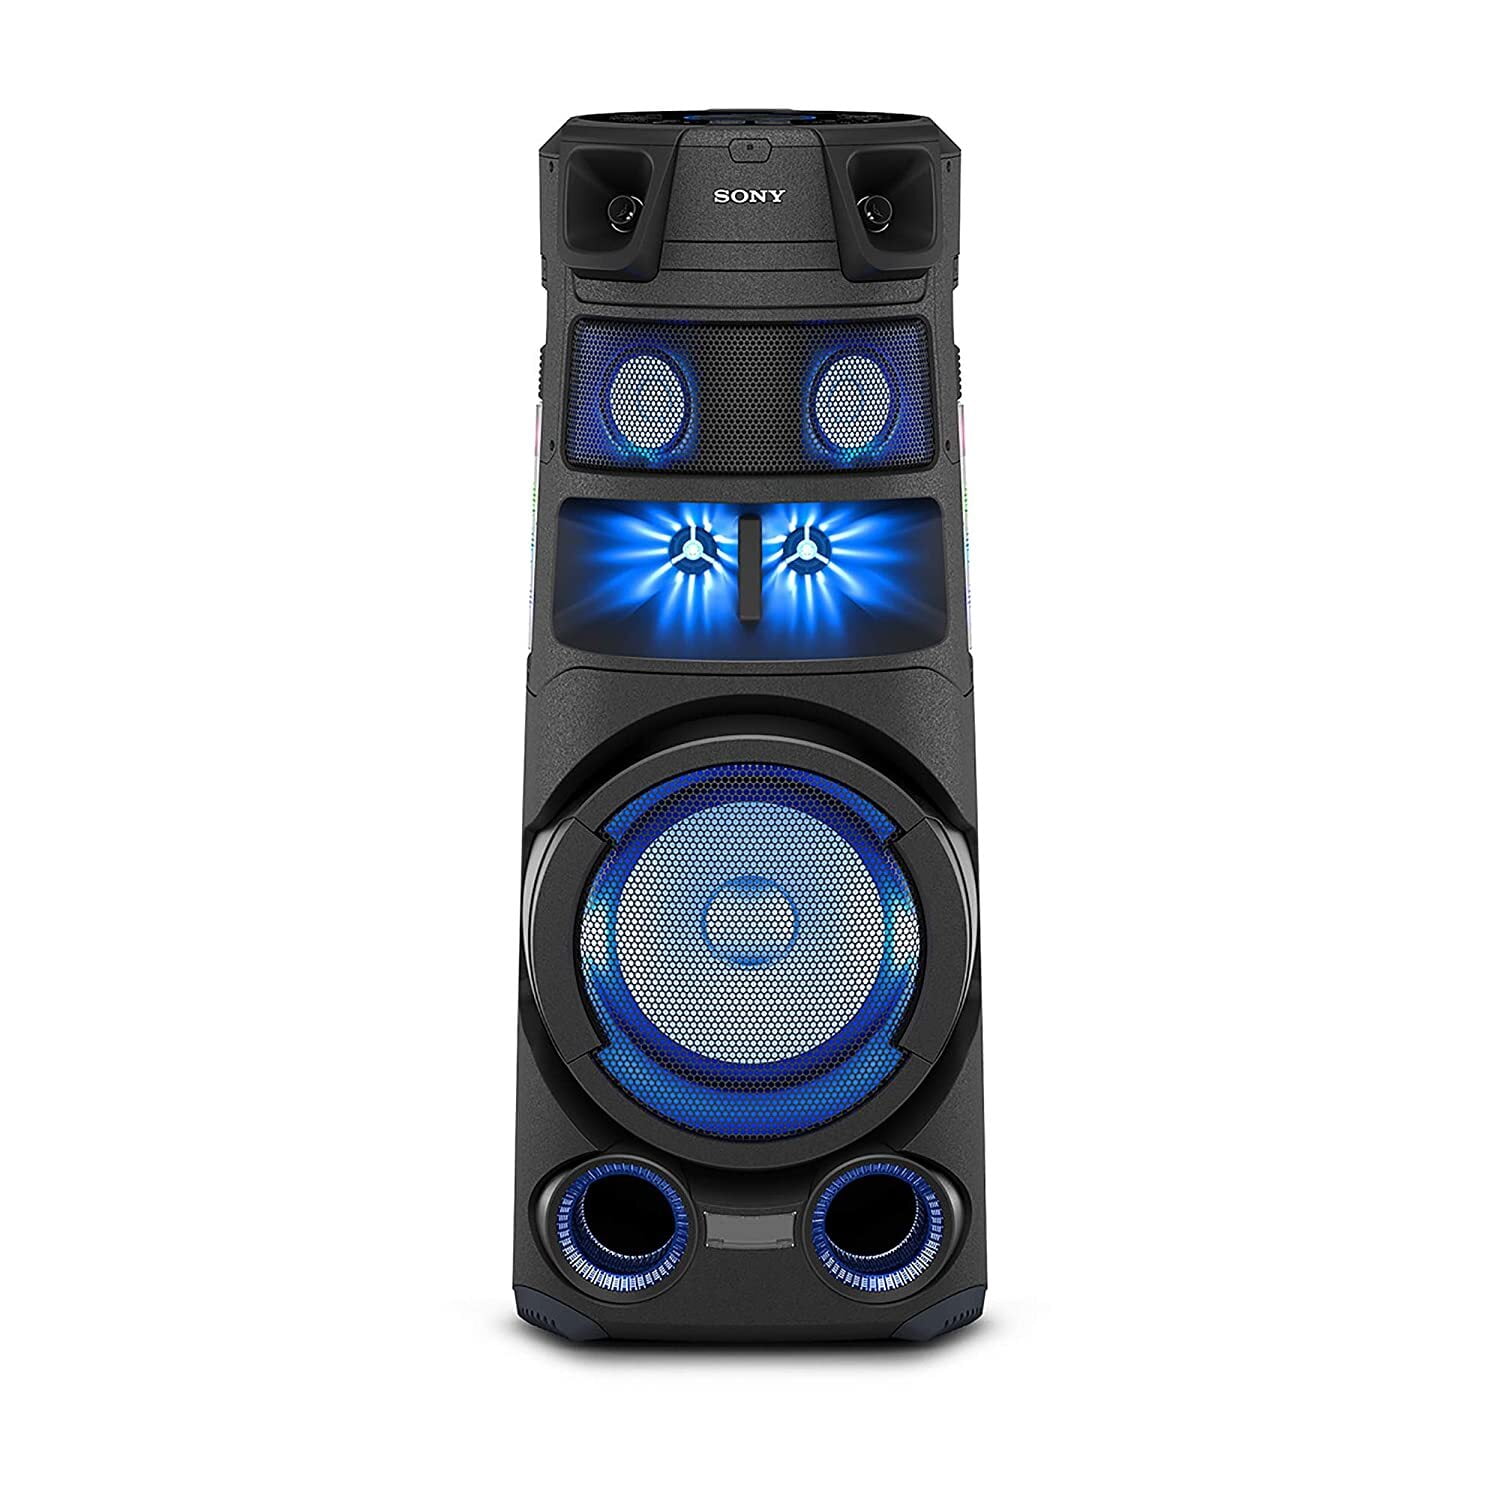 Sony MHC-V83 D BT Party Speaker On Dillimall.Com